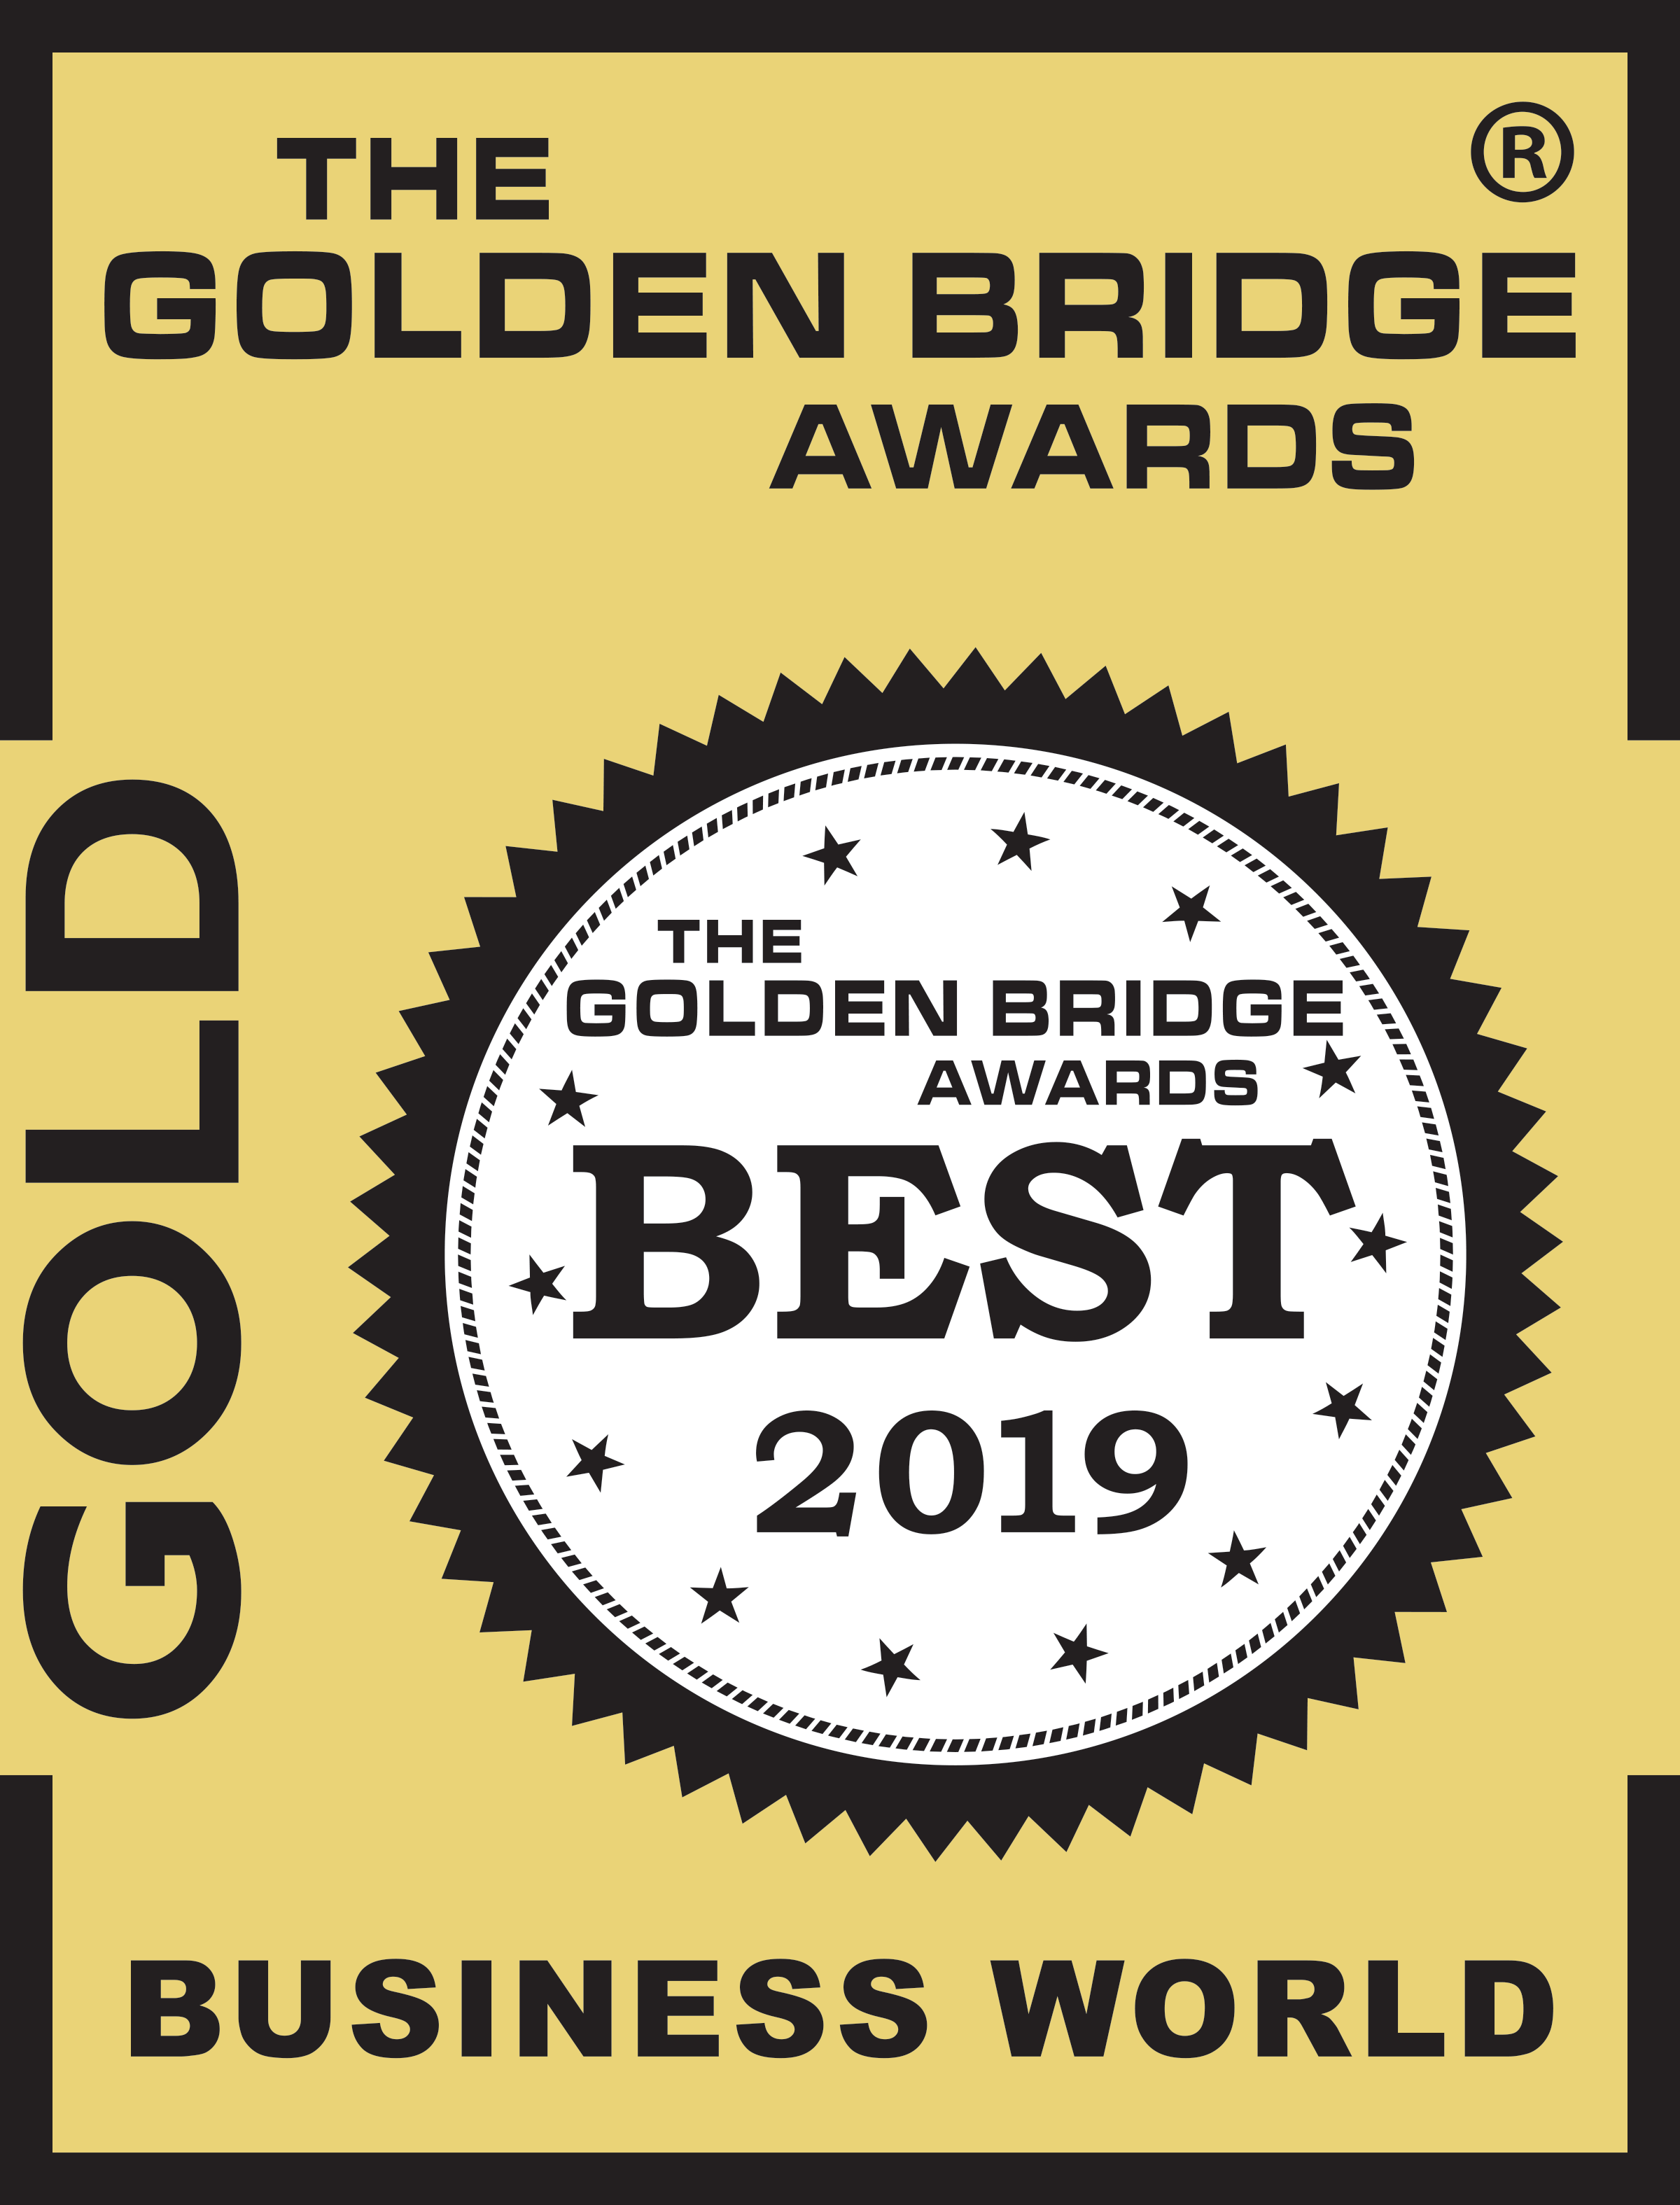 Workspend is a Gold Winner in the 11th Annual 2019 Golden Bridge Awards®